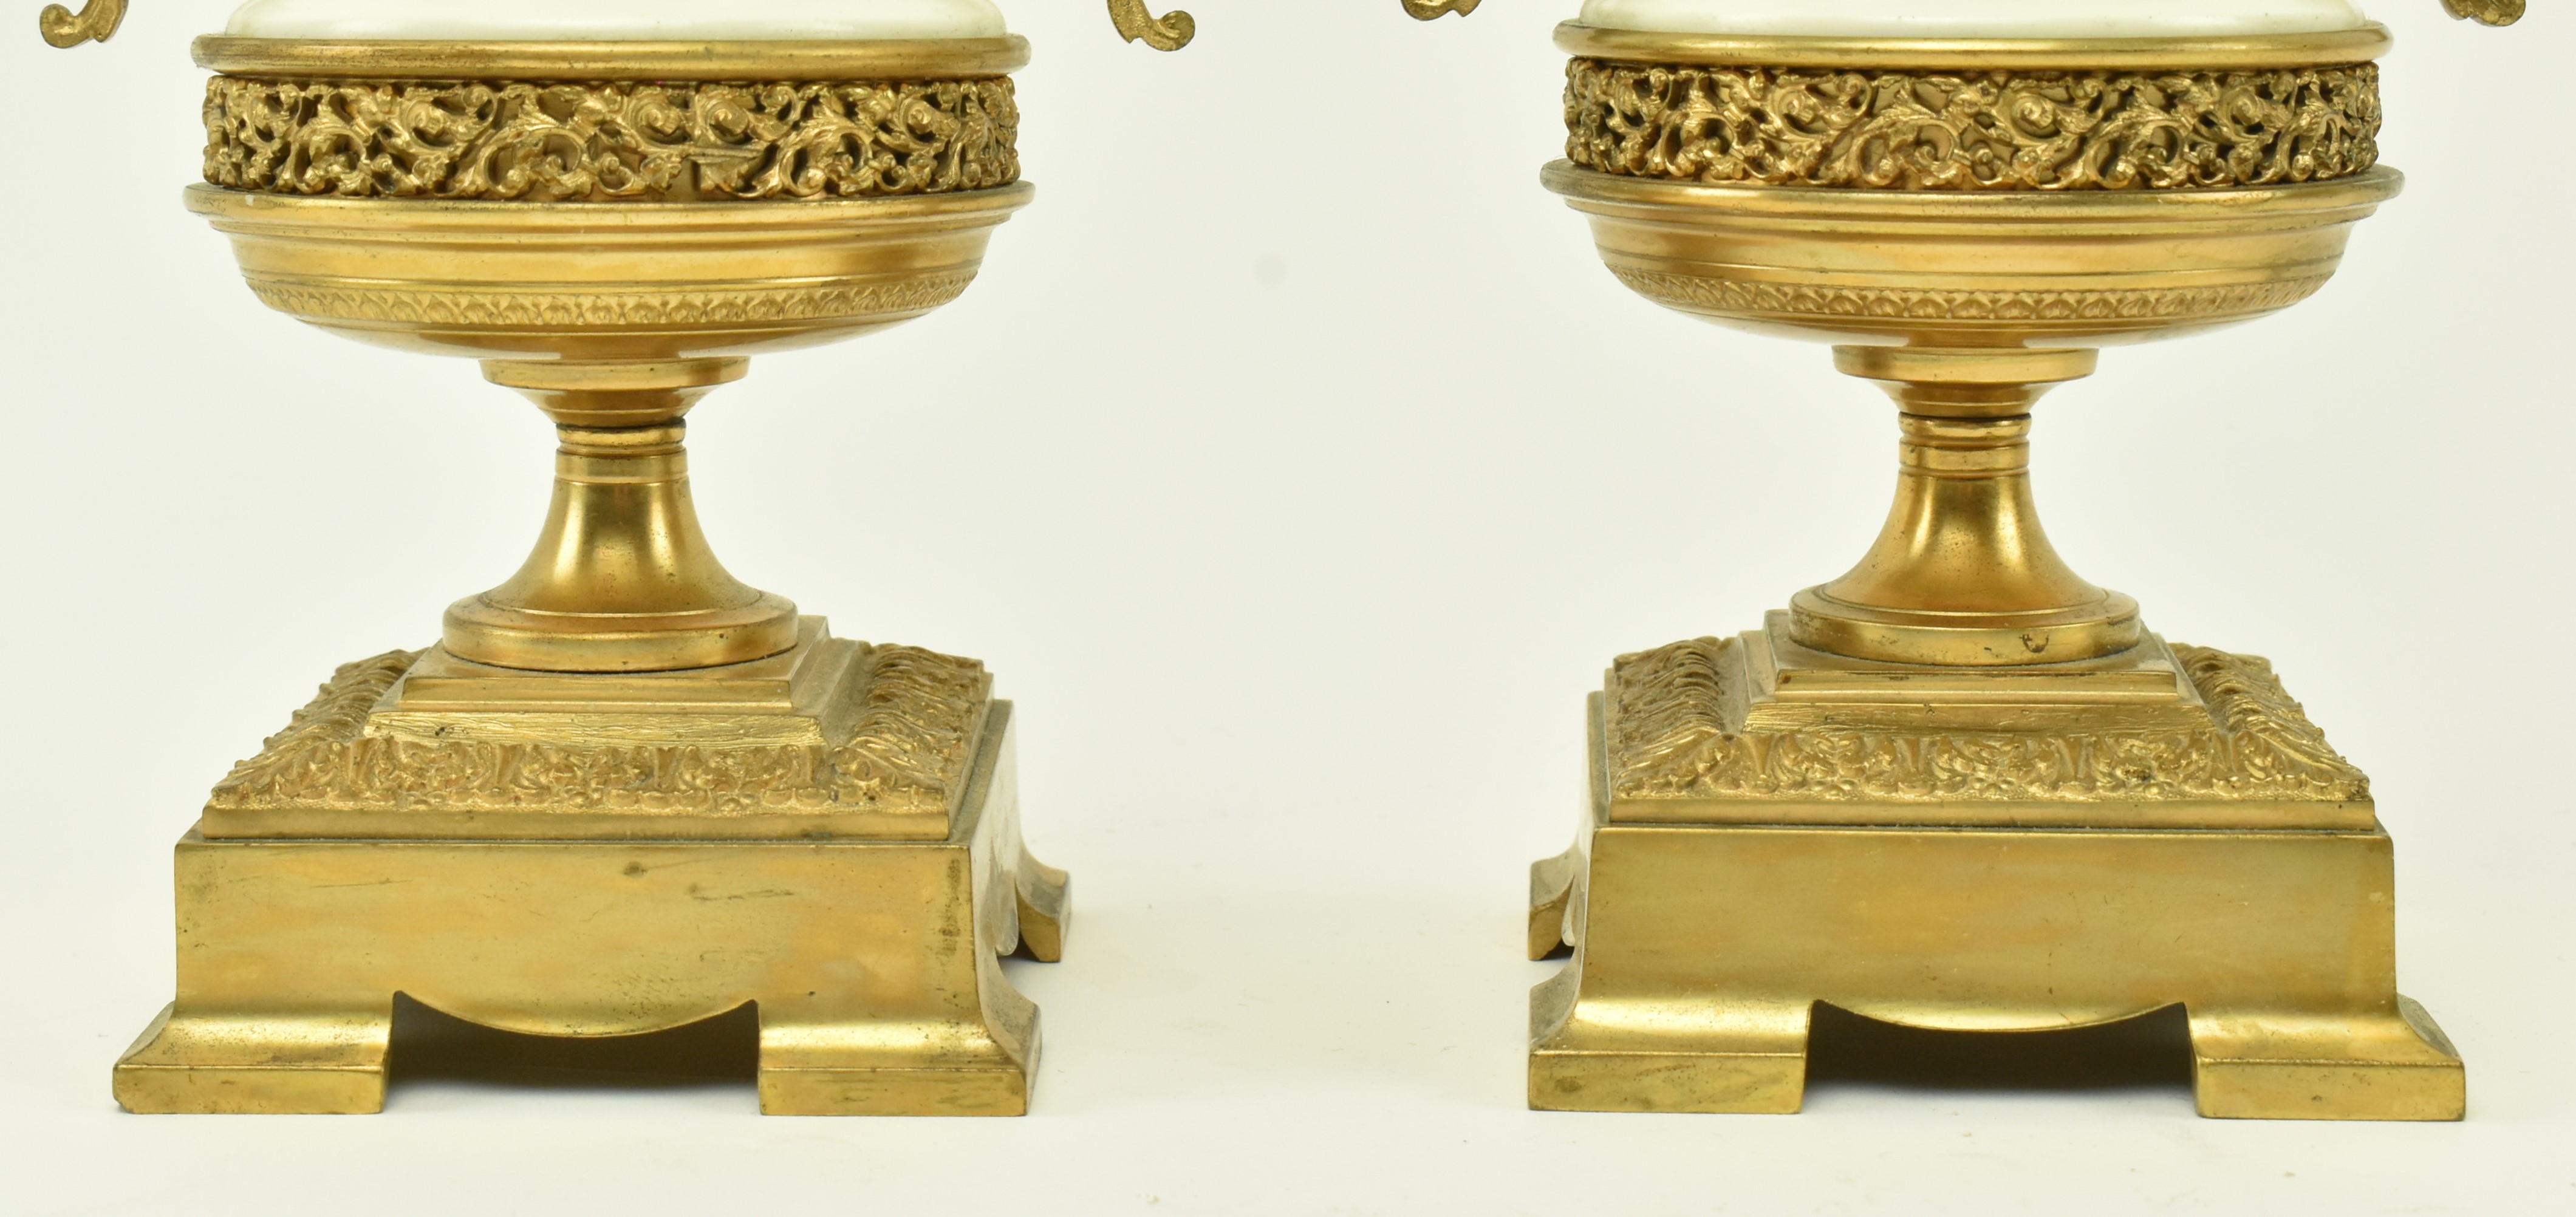 FRENCH 19TH CENTURY PORCELAIN & GILT BRONZE MANTLE URNS - Image 6 of 7